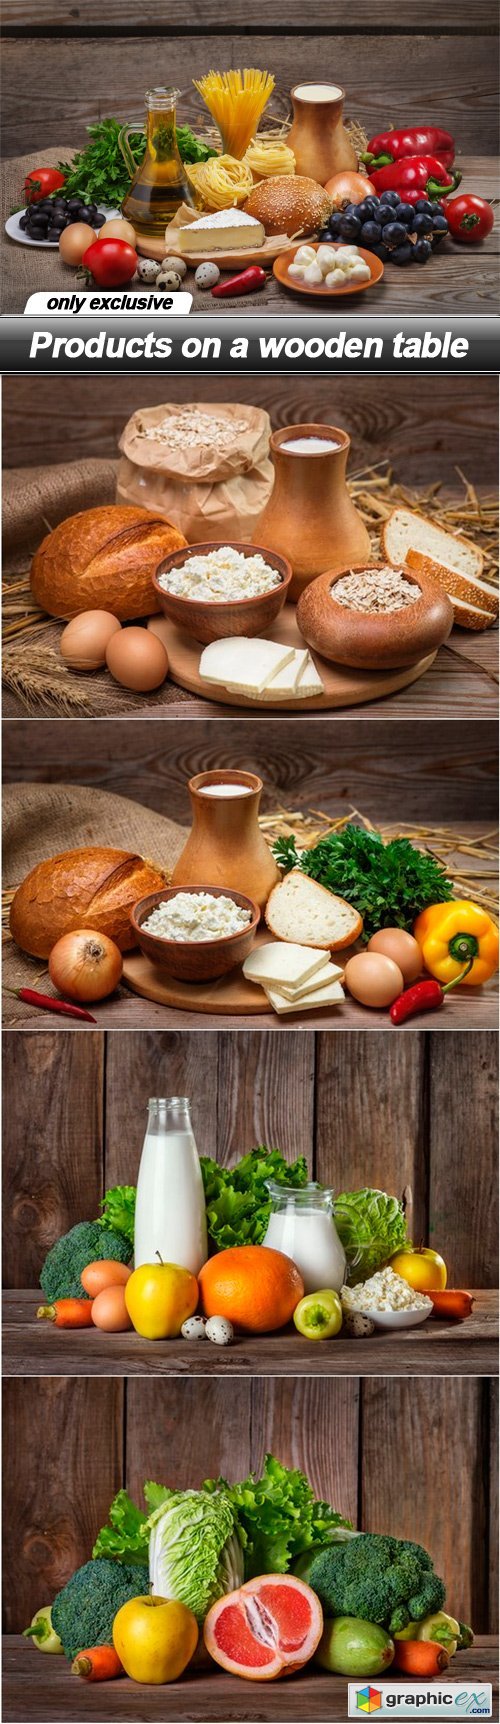 Products on a wooden table - 5 UHQ JPEG